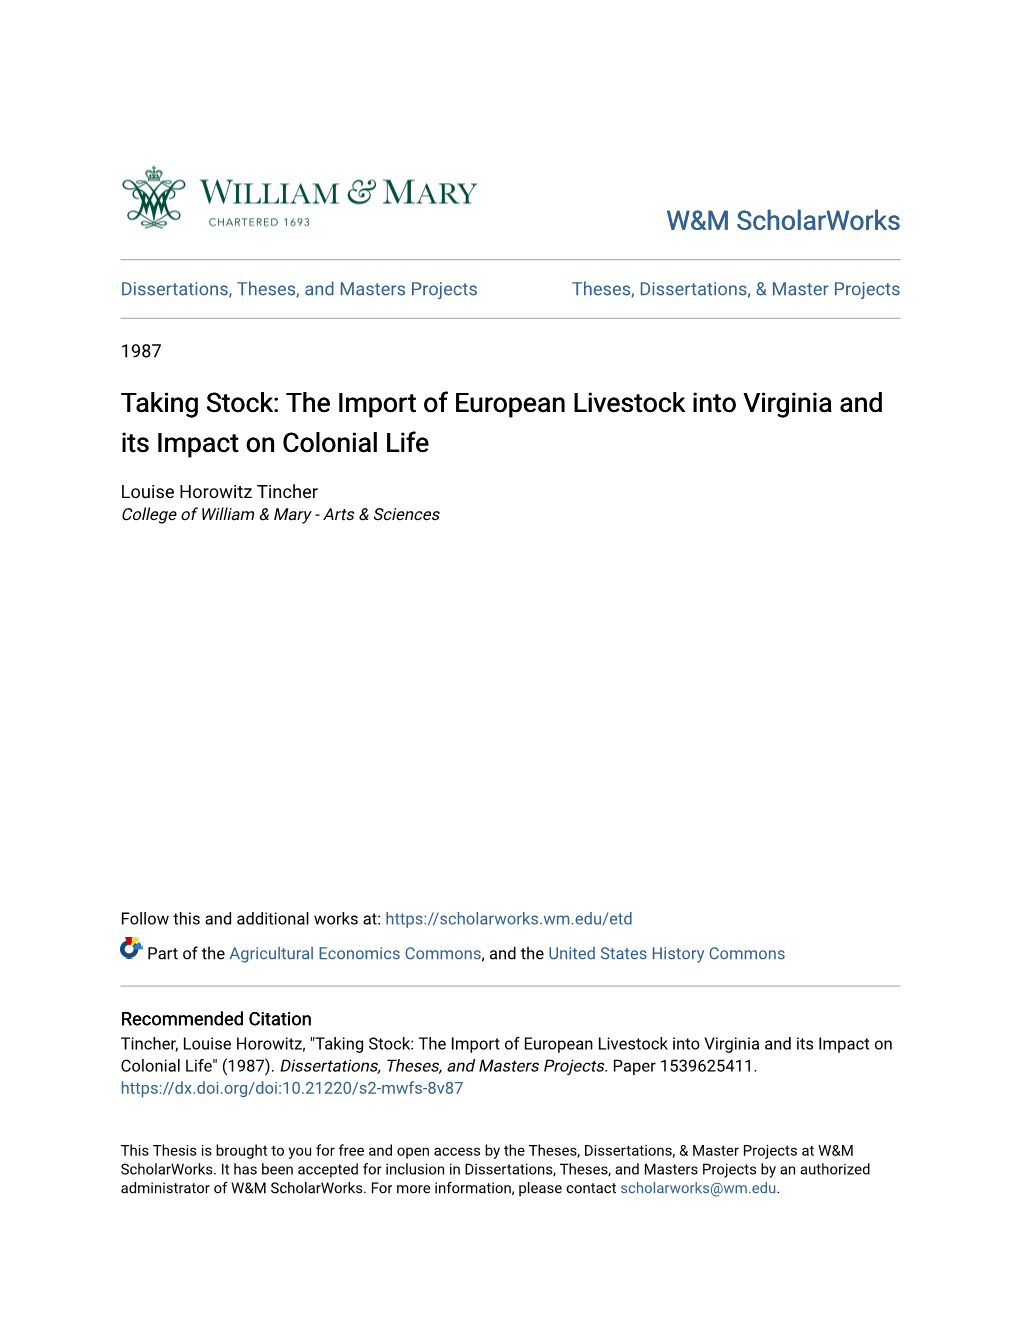 The Import of European Livestock Into Virginia and Its Impact on Colonial Life